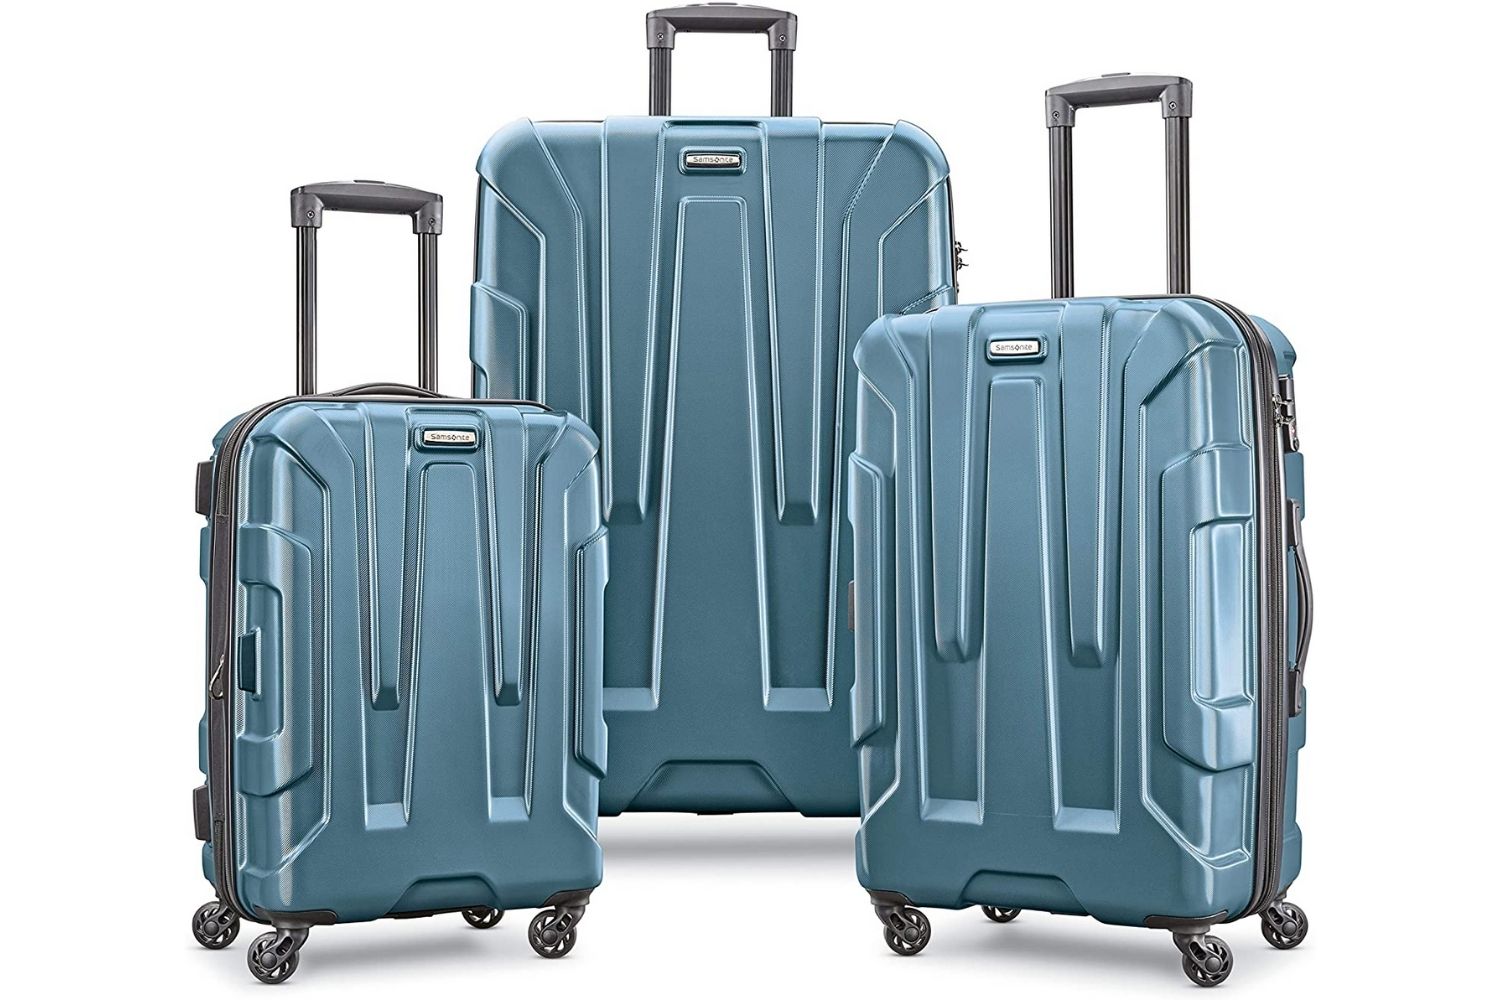 The Best Travel Gifts Option: Samsonite Centric Hardside Expandable Luggage